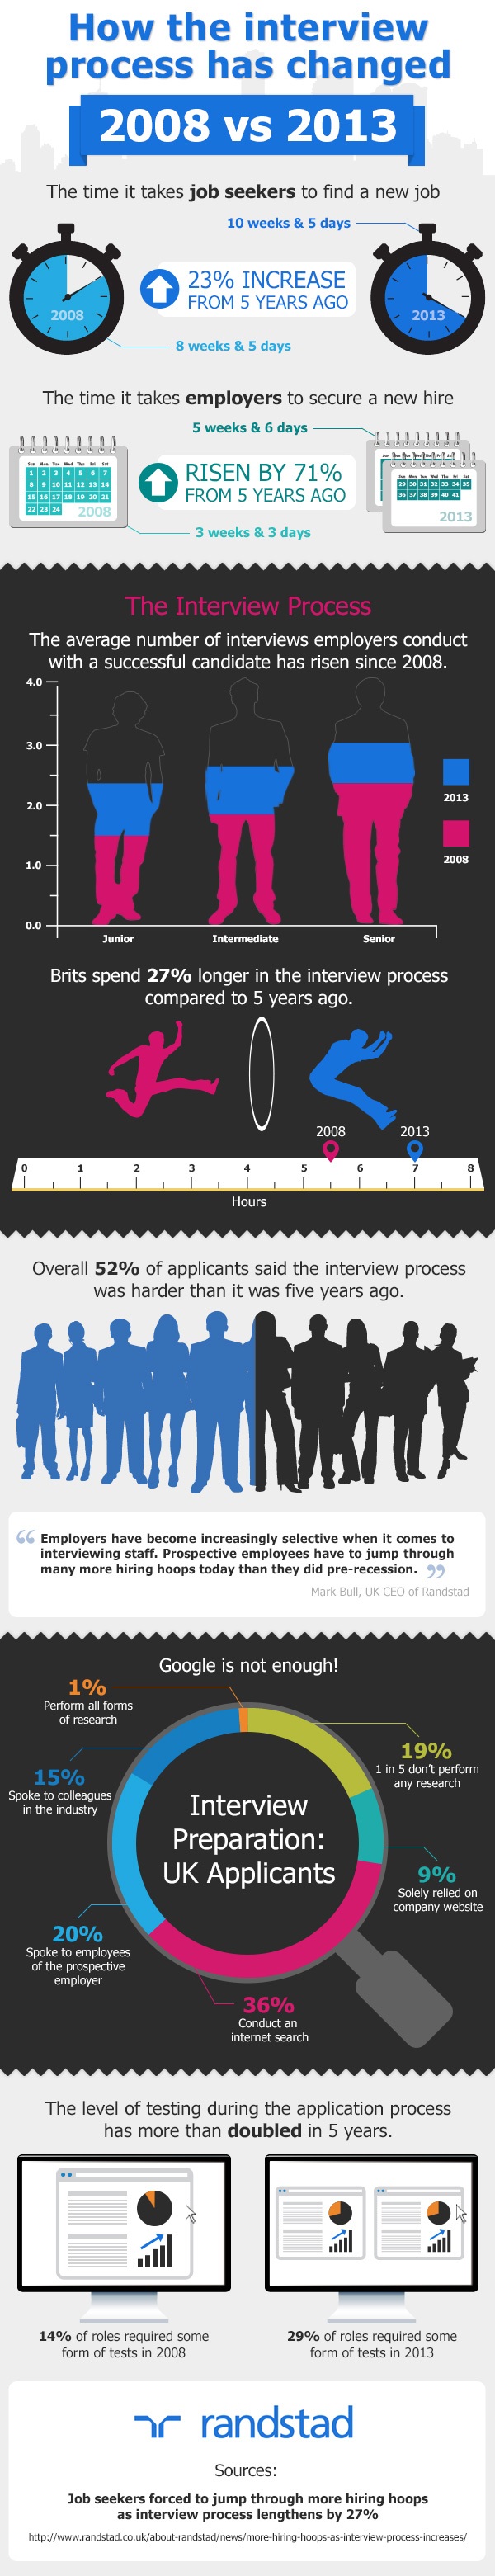 infographic about interview process getting longer